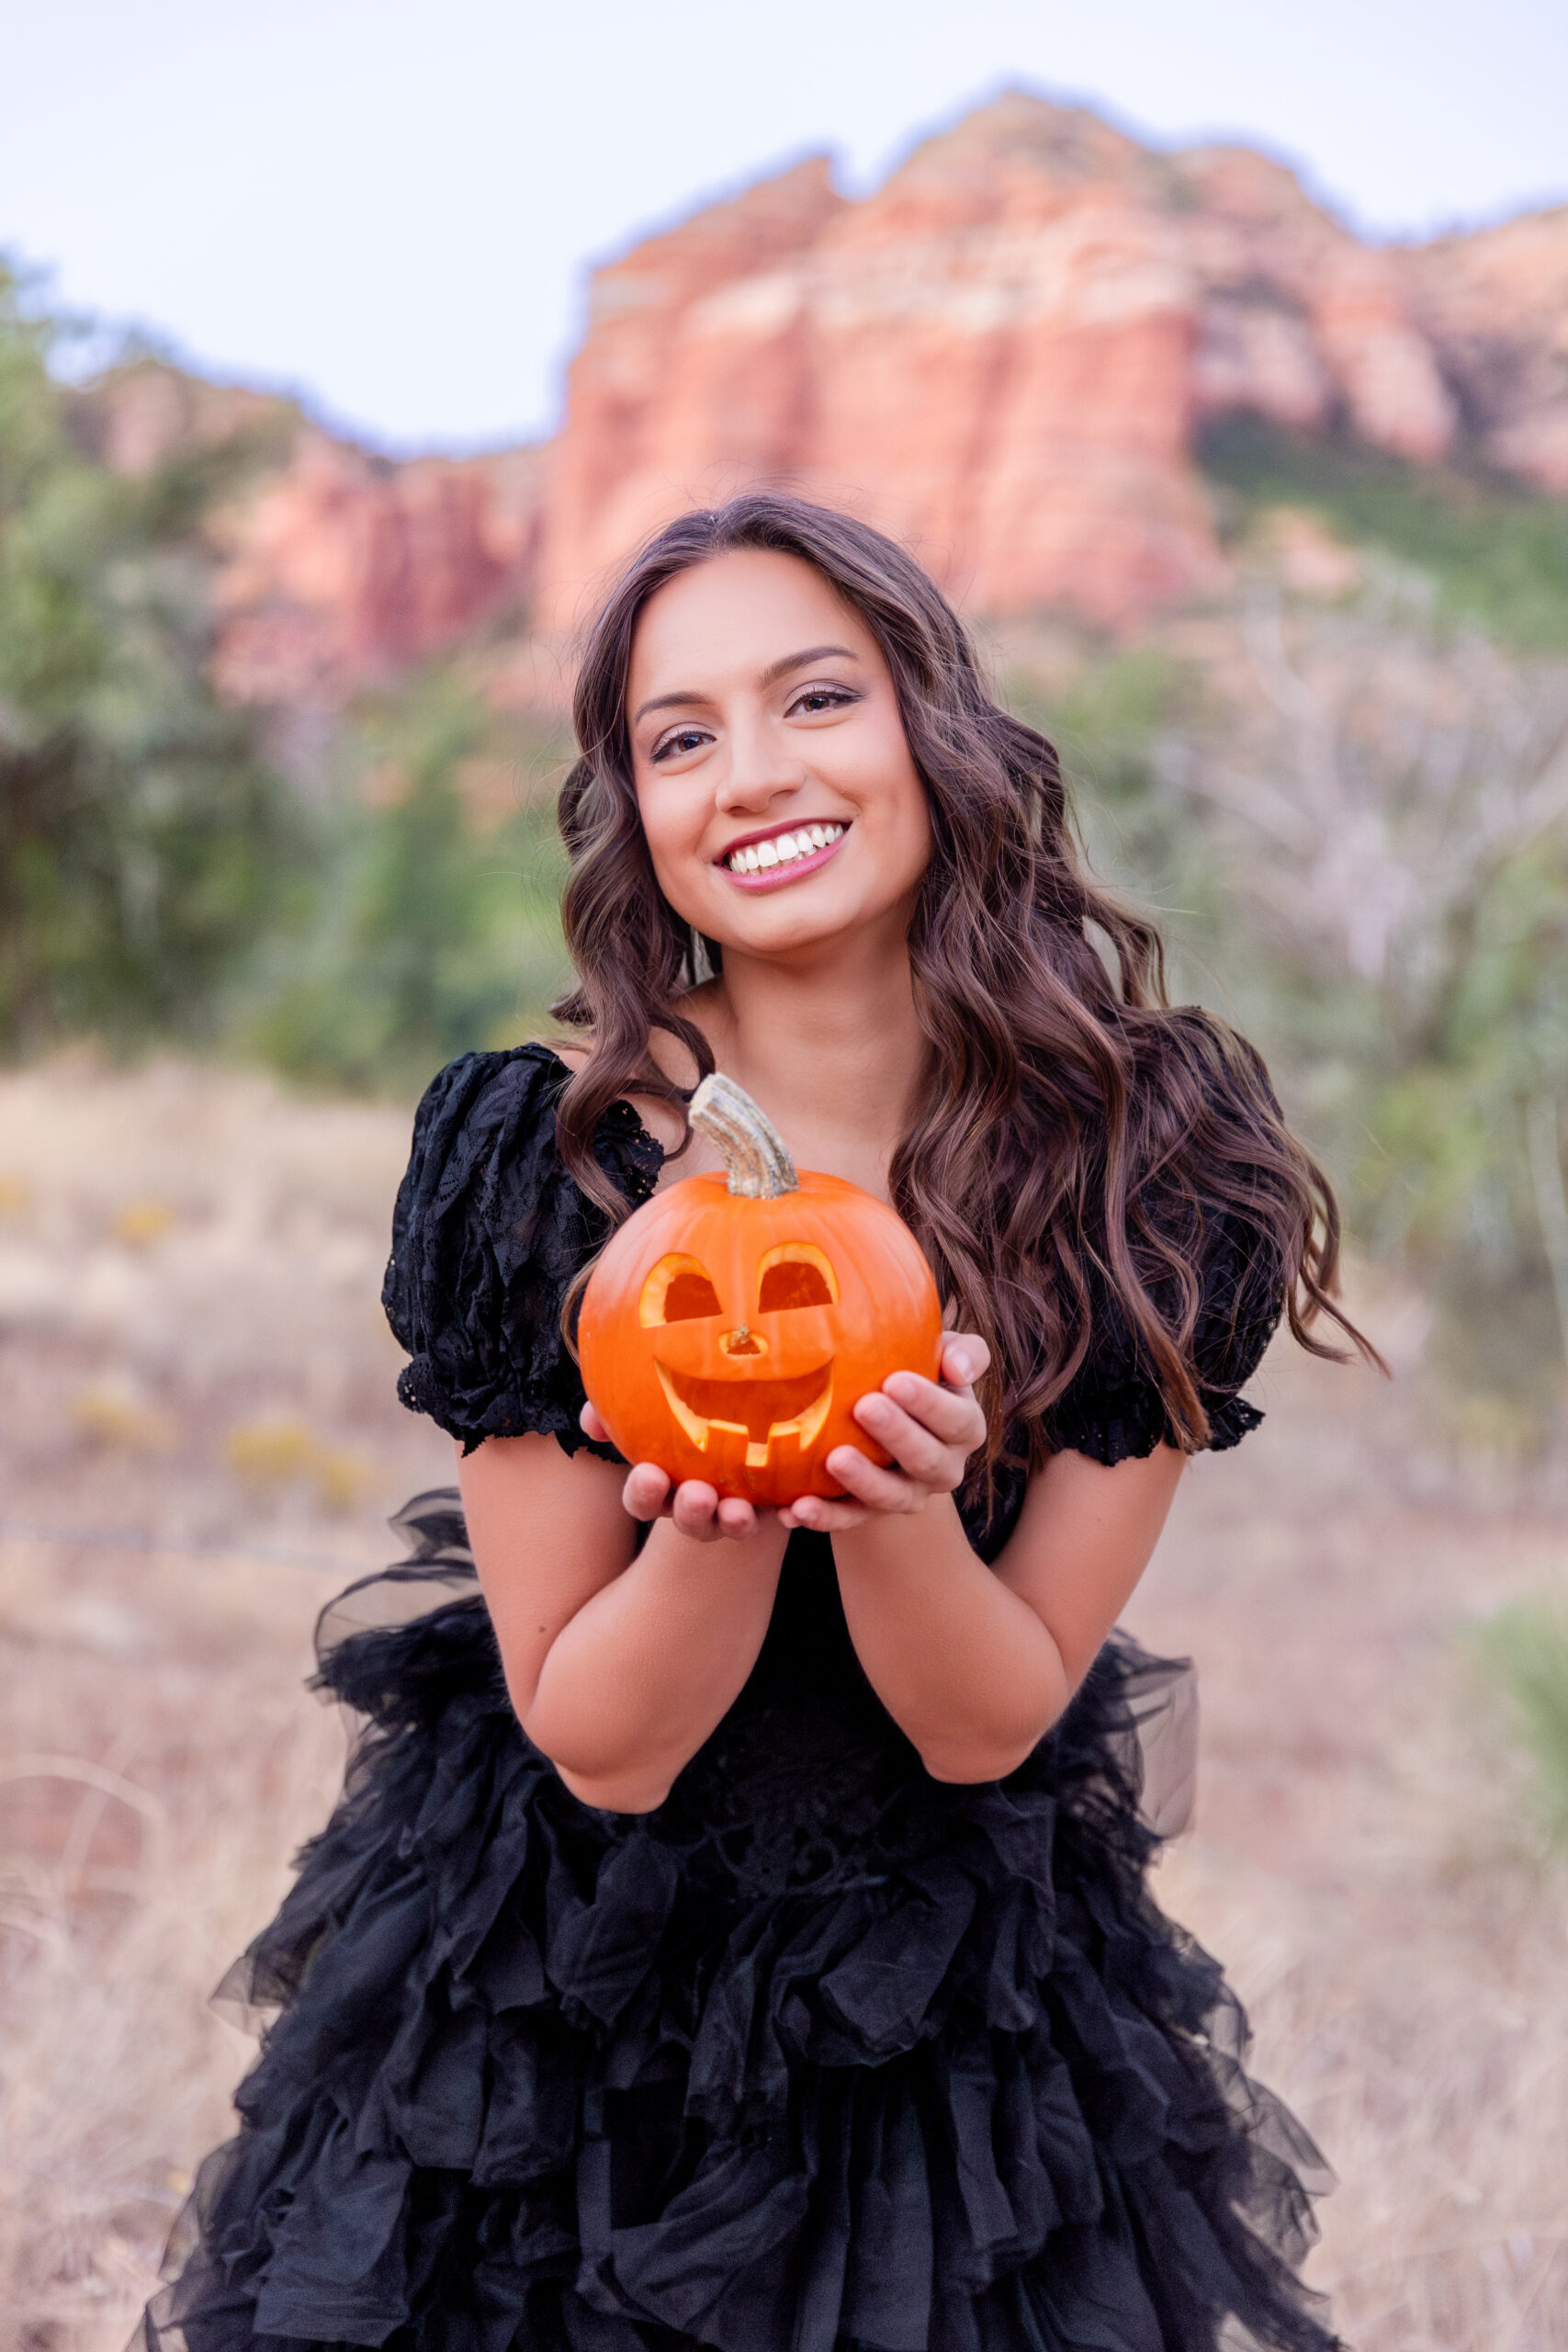 A stunning model in a flowing black gown holding a jack-o-lantern during a spellbinding Halloween sedona portrait session with Bayley Jordan Photography